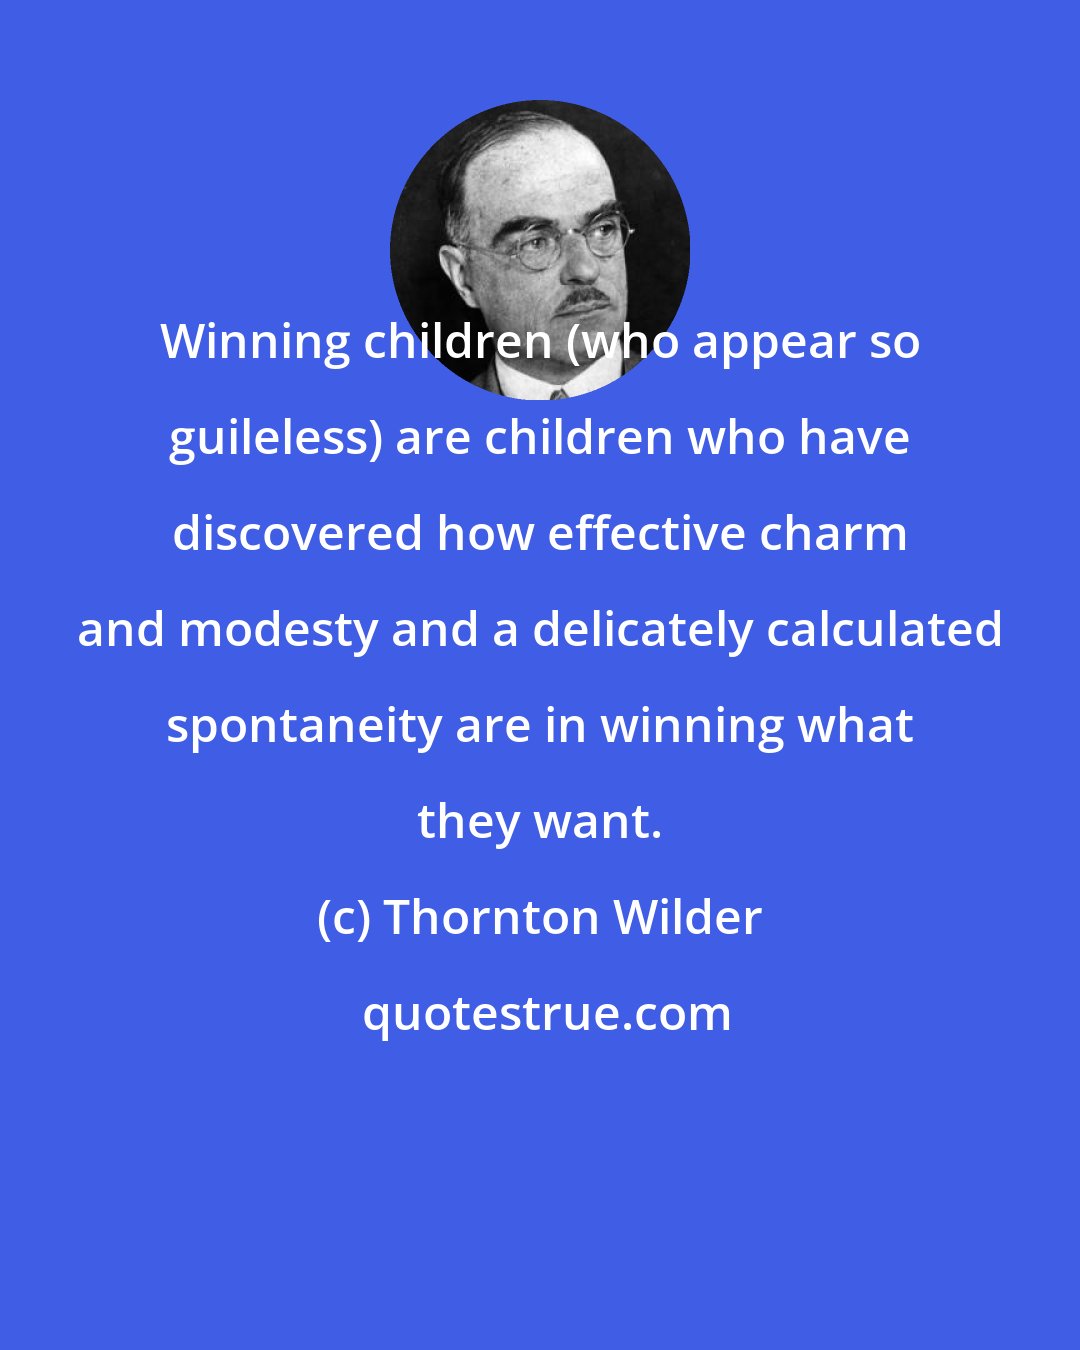 Thornton Wilder: Winning children (who appear so guileless) are children who have discovered how effective charm and modesty and a delicately calculated spontaneity are in winning what they want.